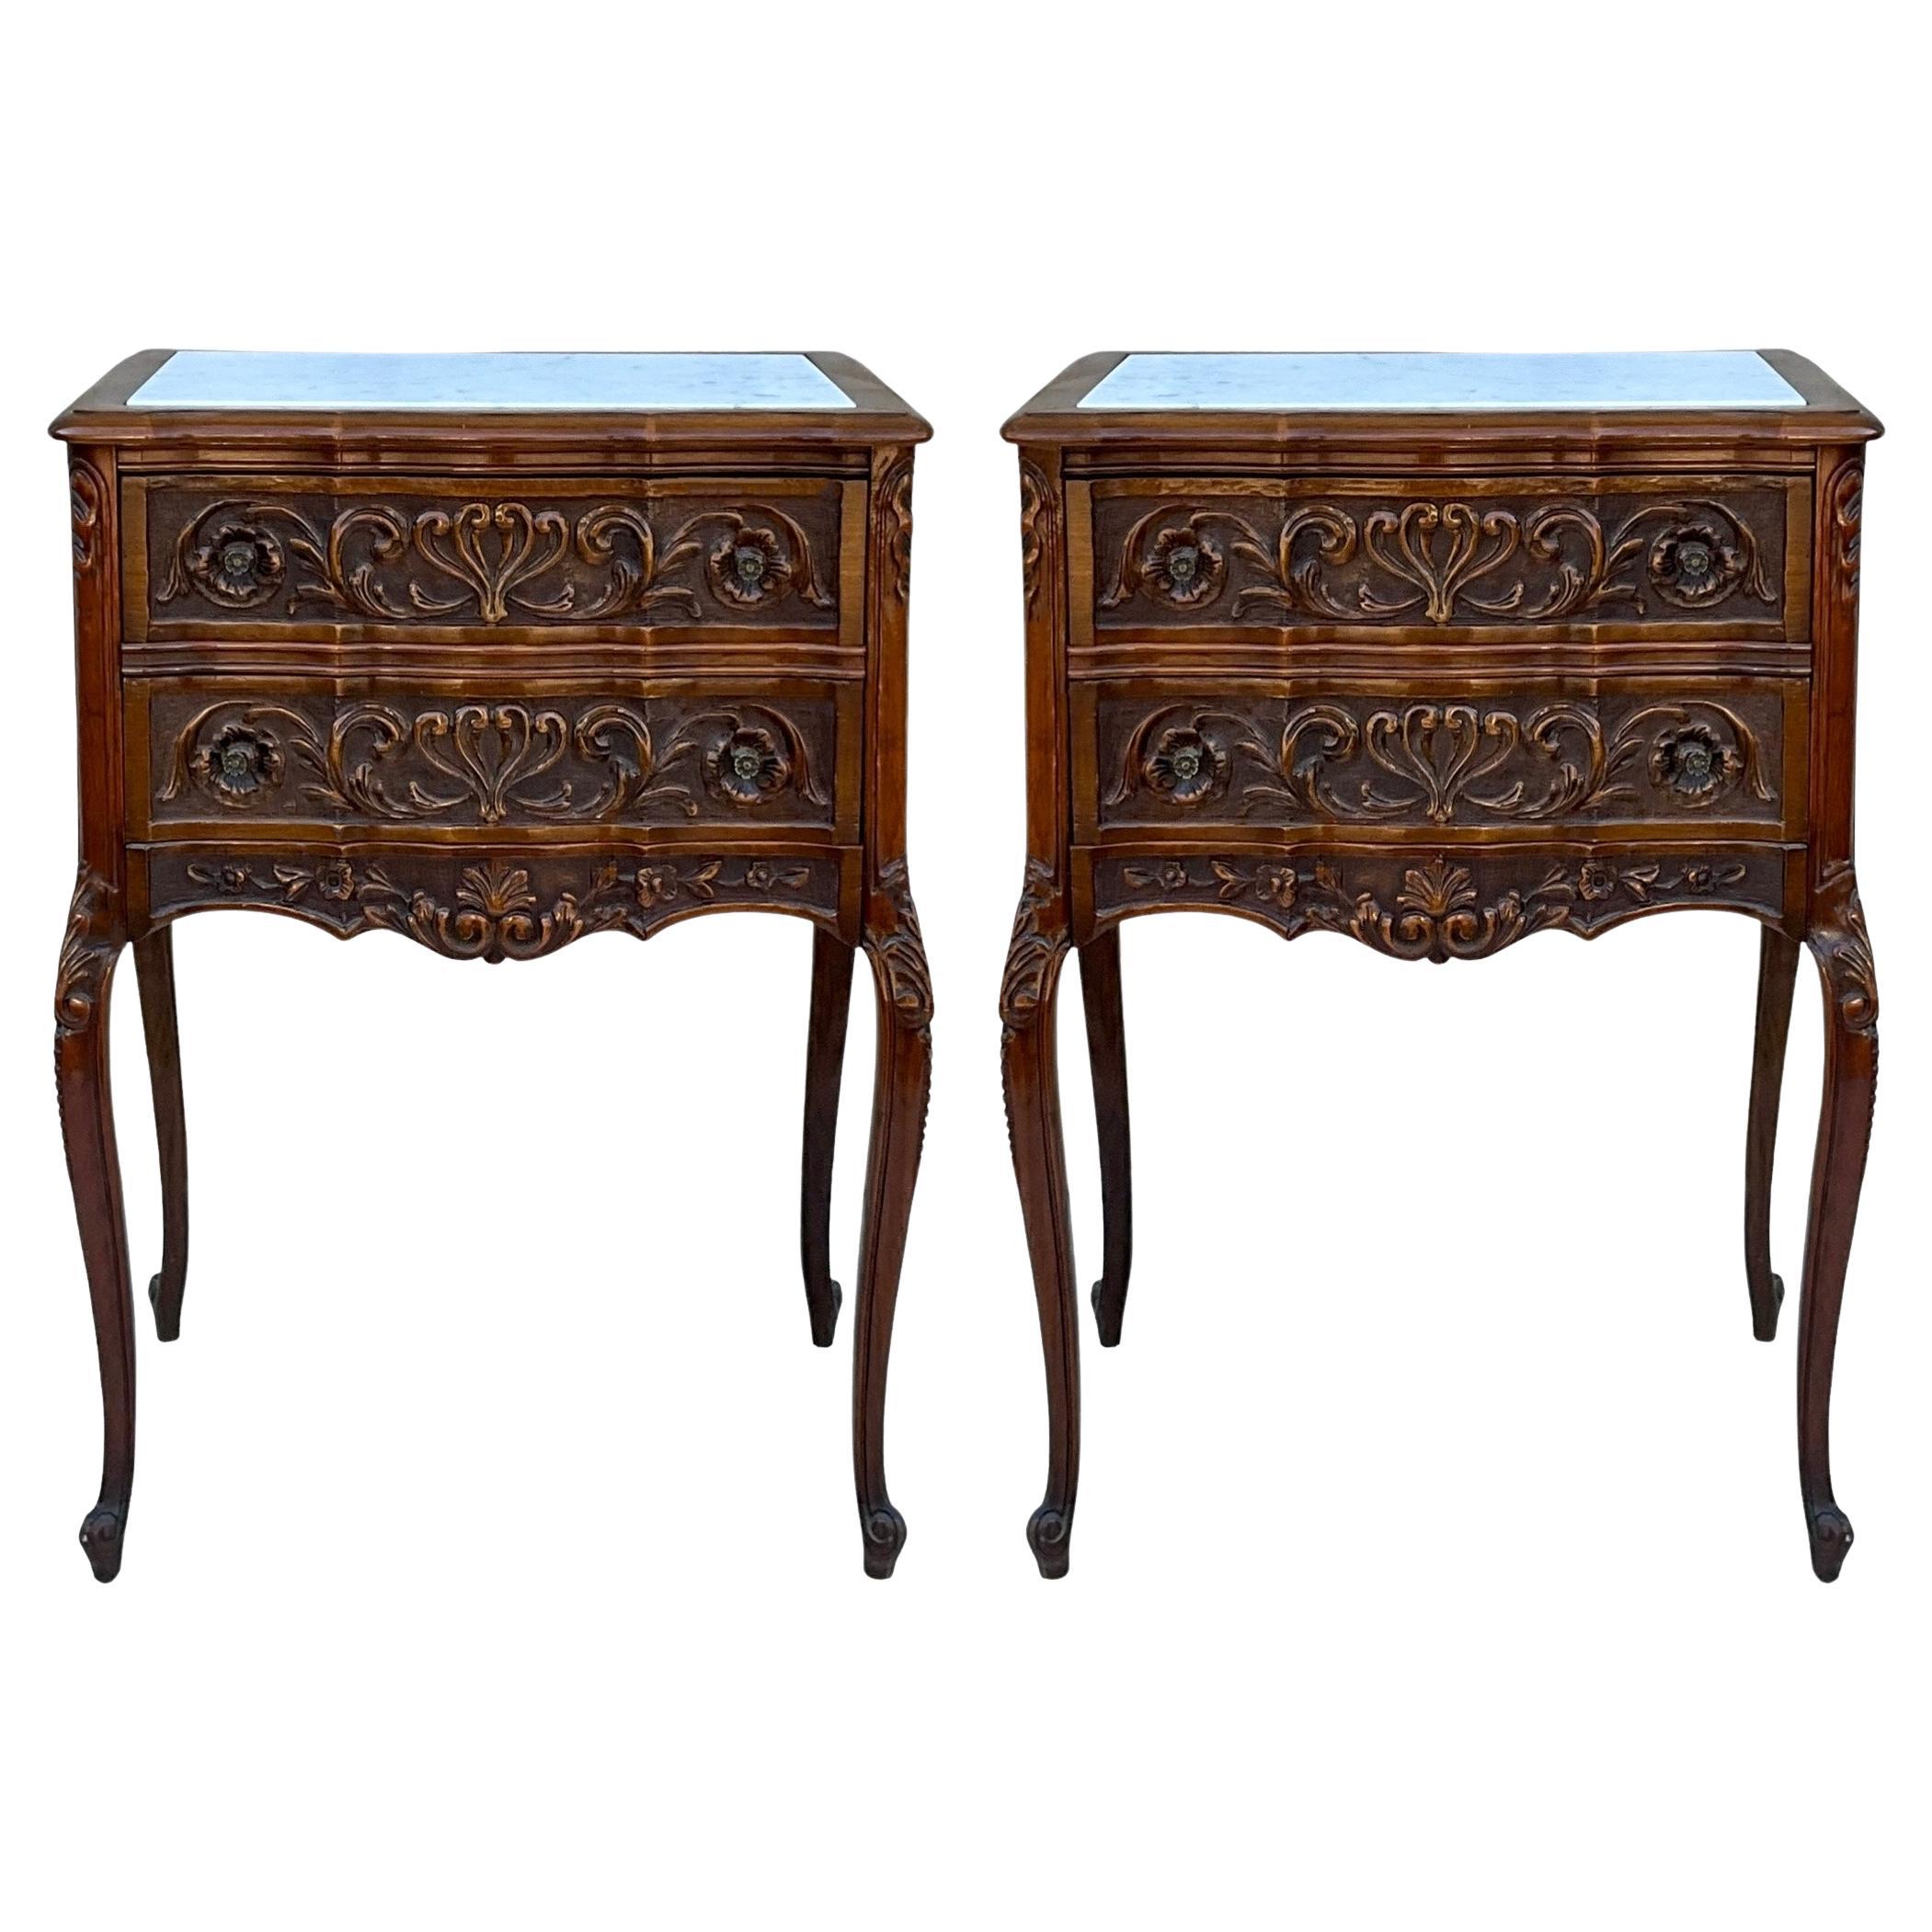 Antique French Louis XV Style Marble Top And Walnut Side Tables / Chests - Pair